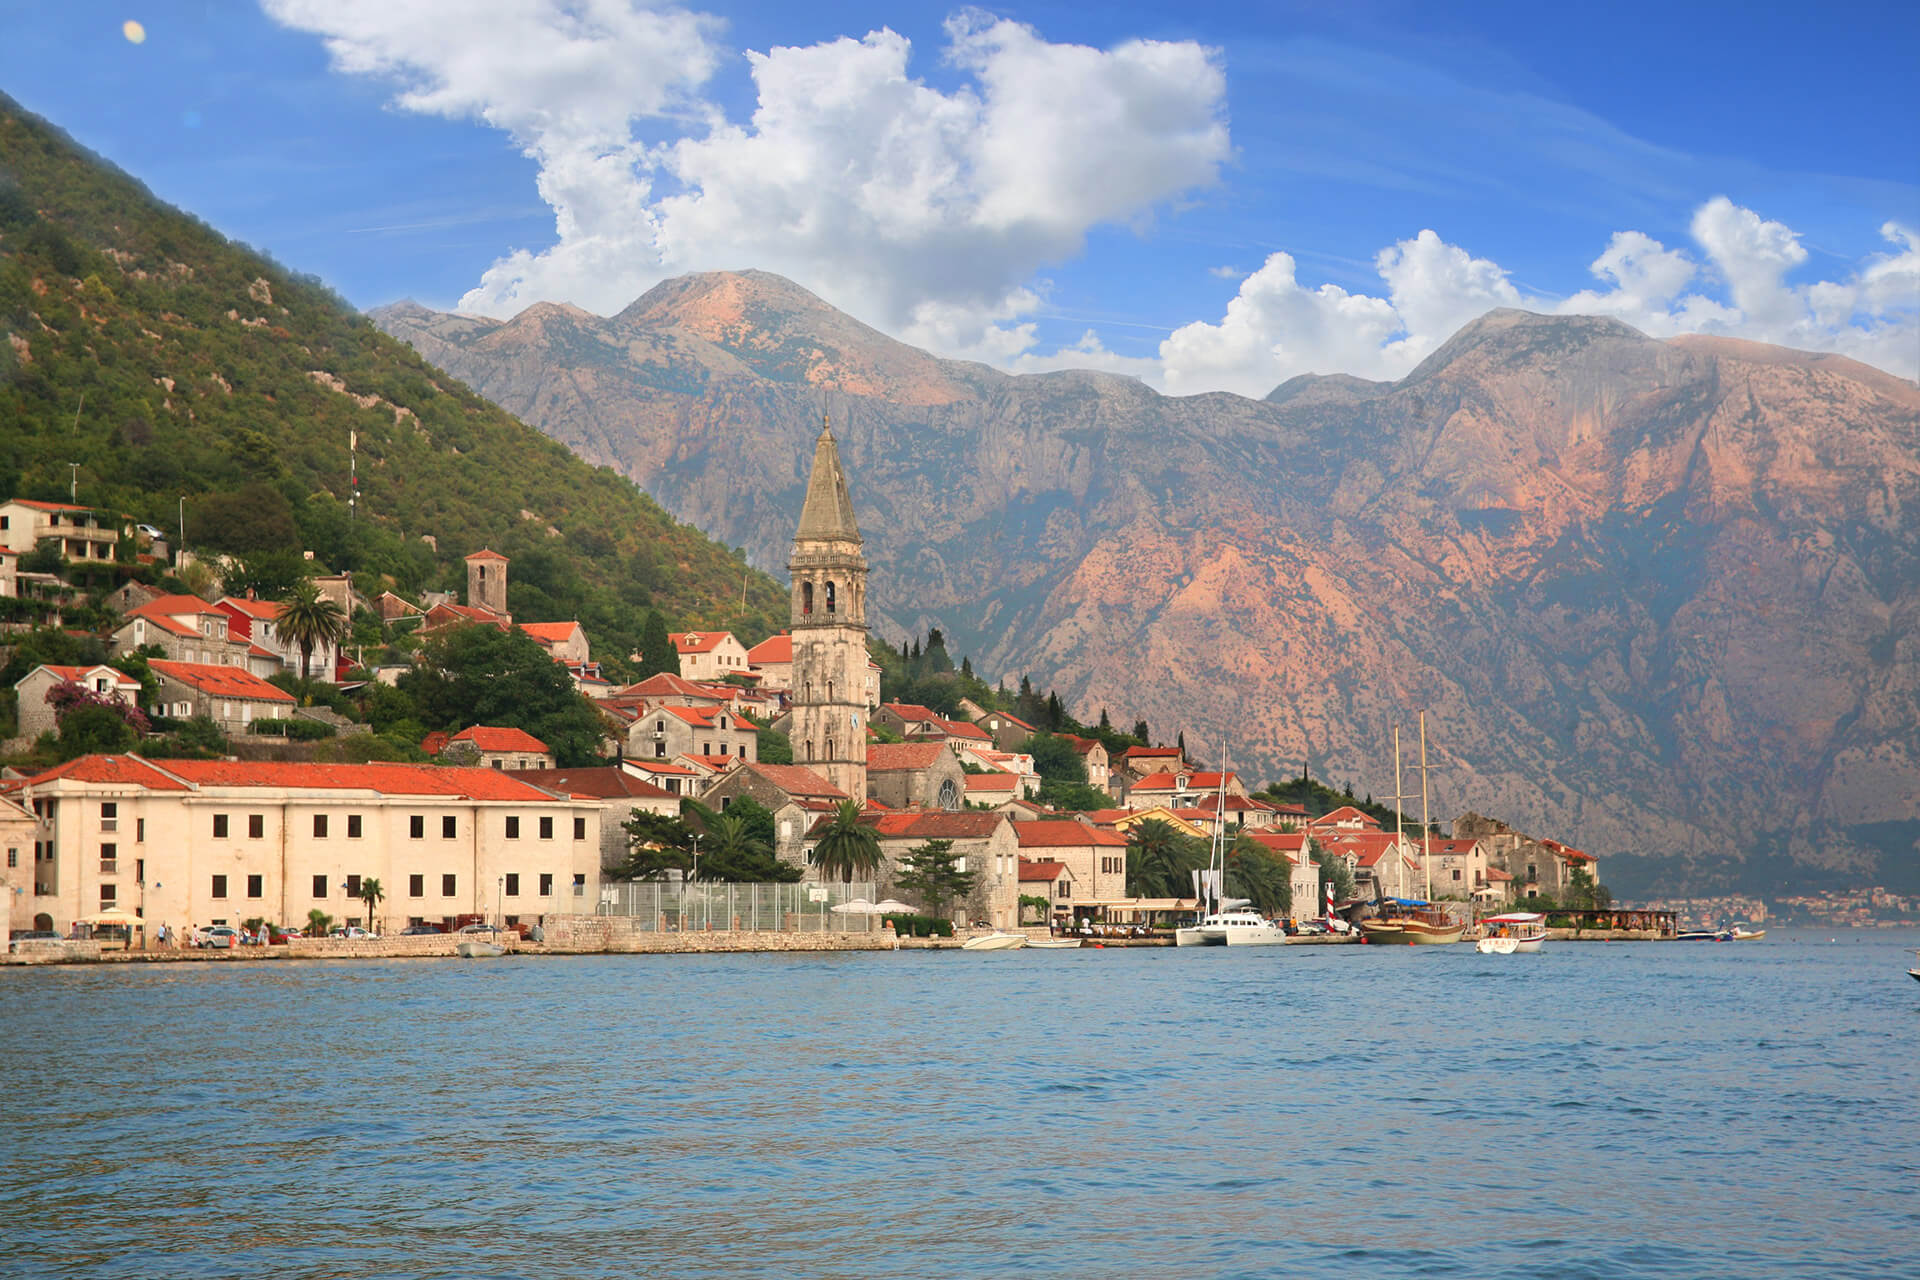 Perast and the island Lady of the rock